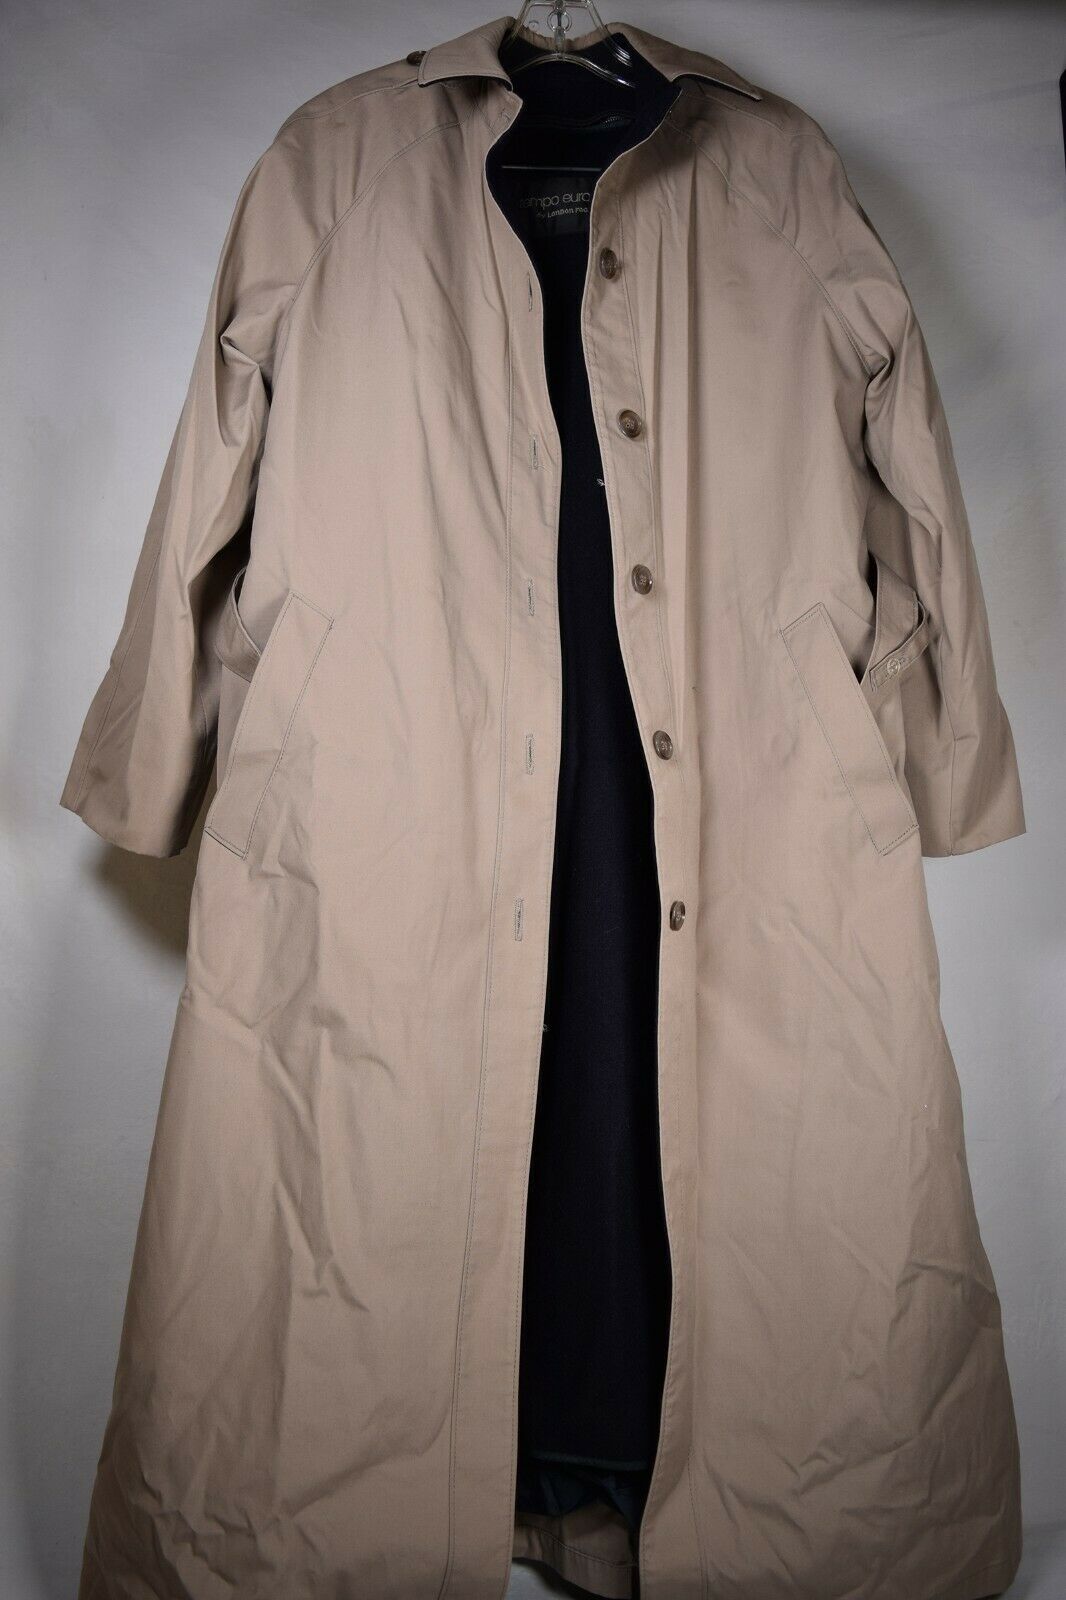 Primary image for London Fog Mens Tempo Europa Lined Khaki Rain Trench Belted Jacket 6